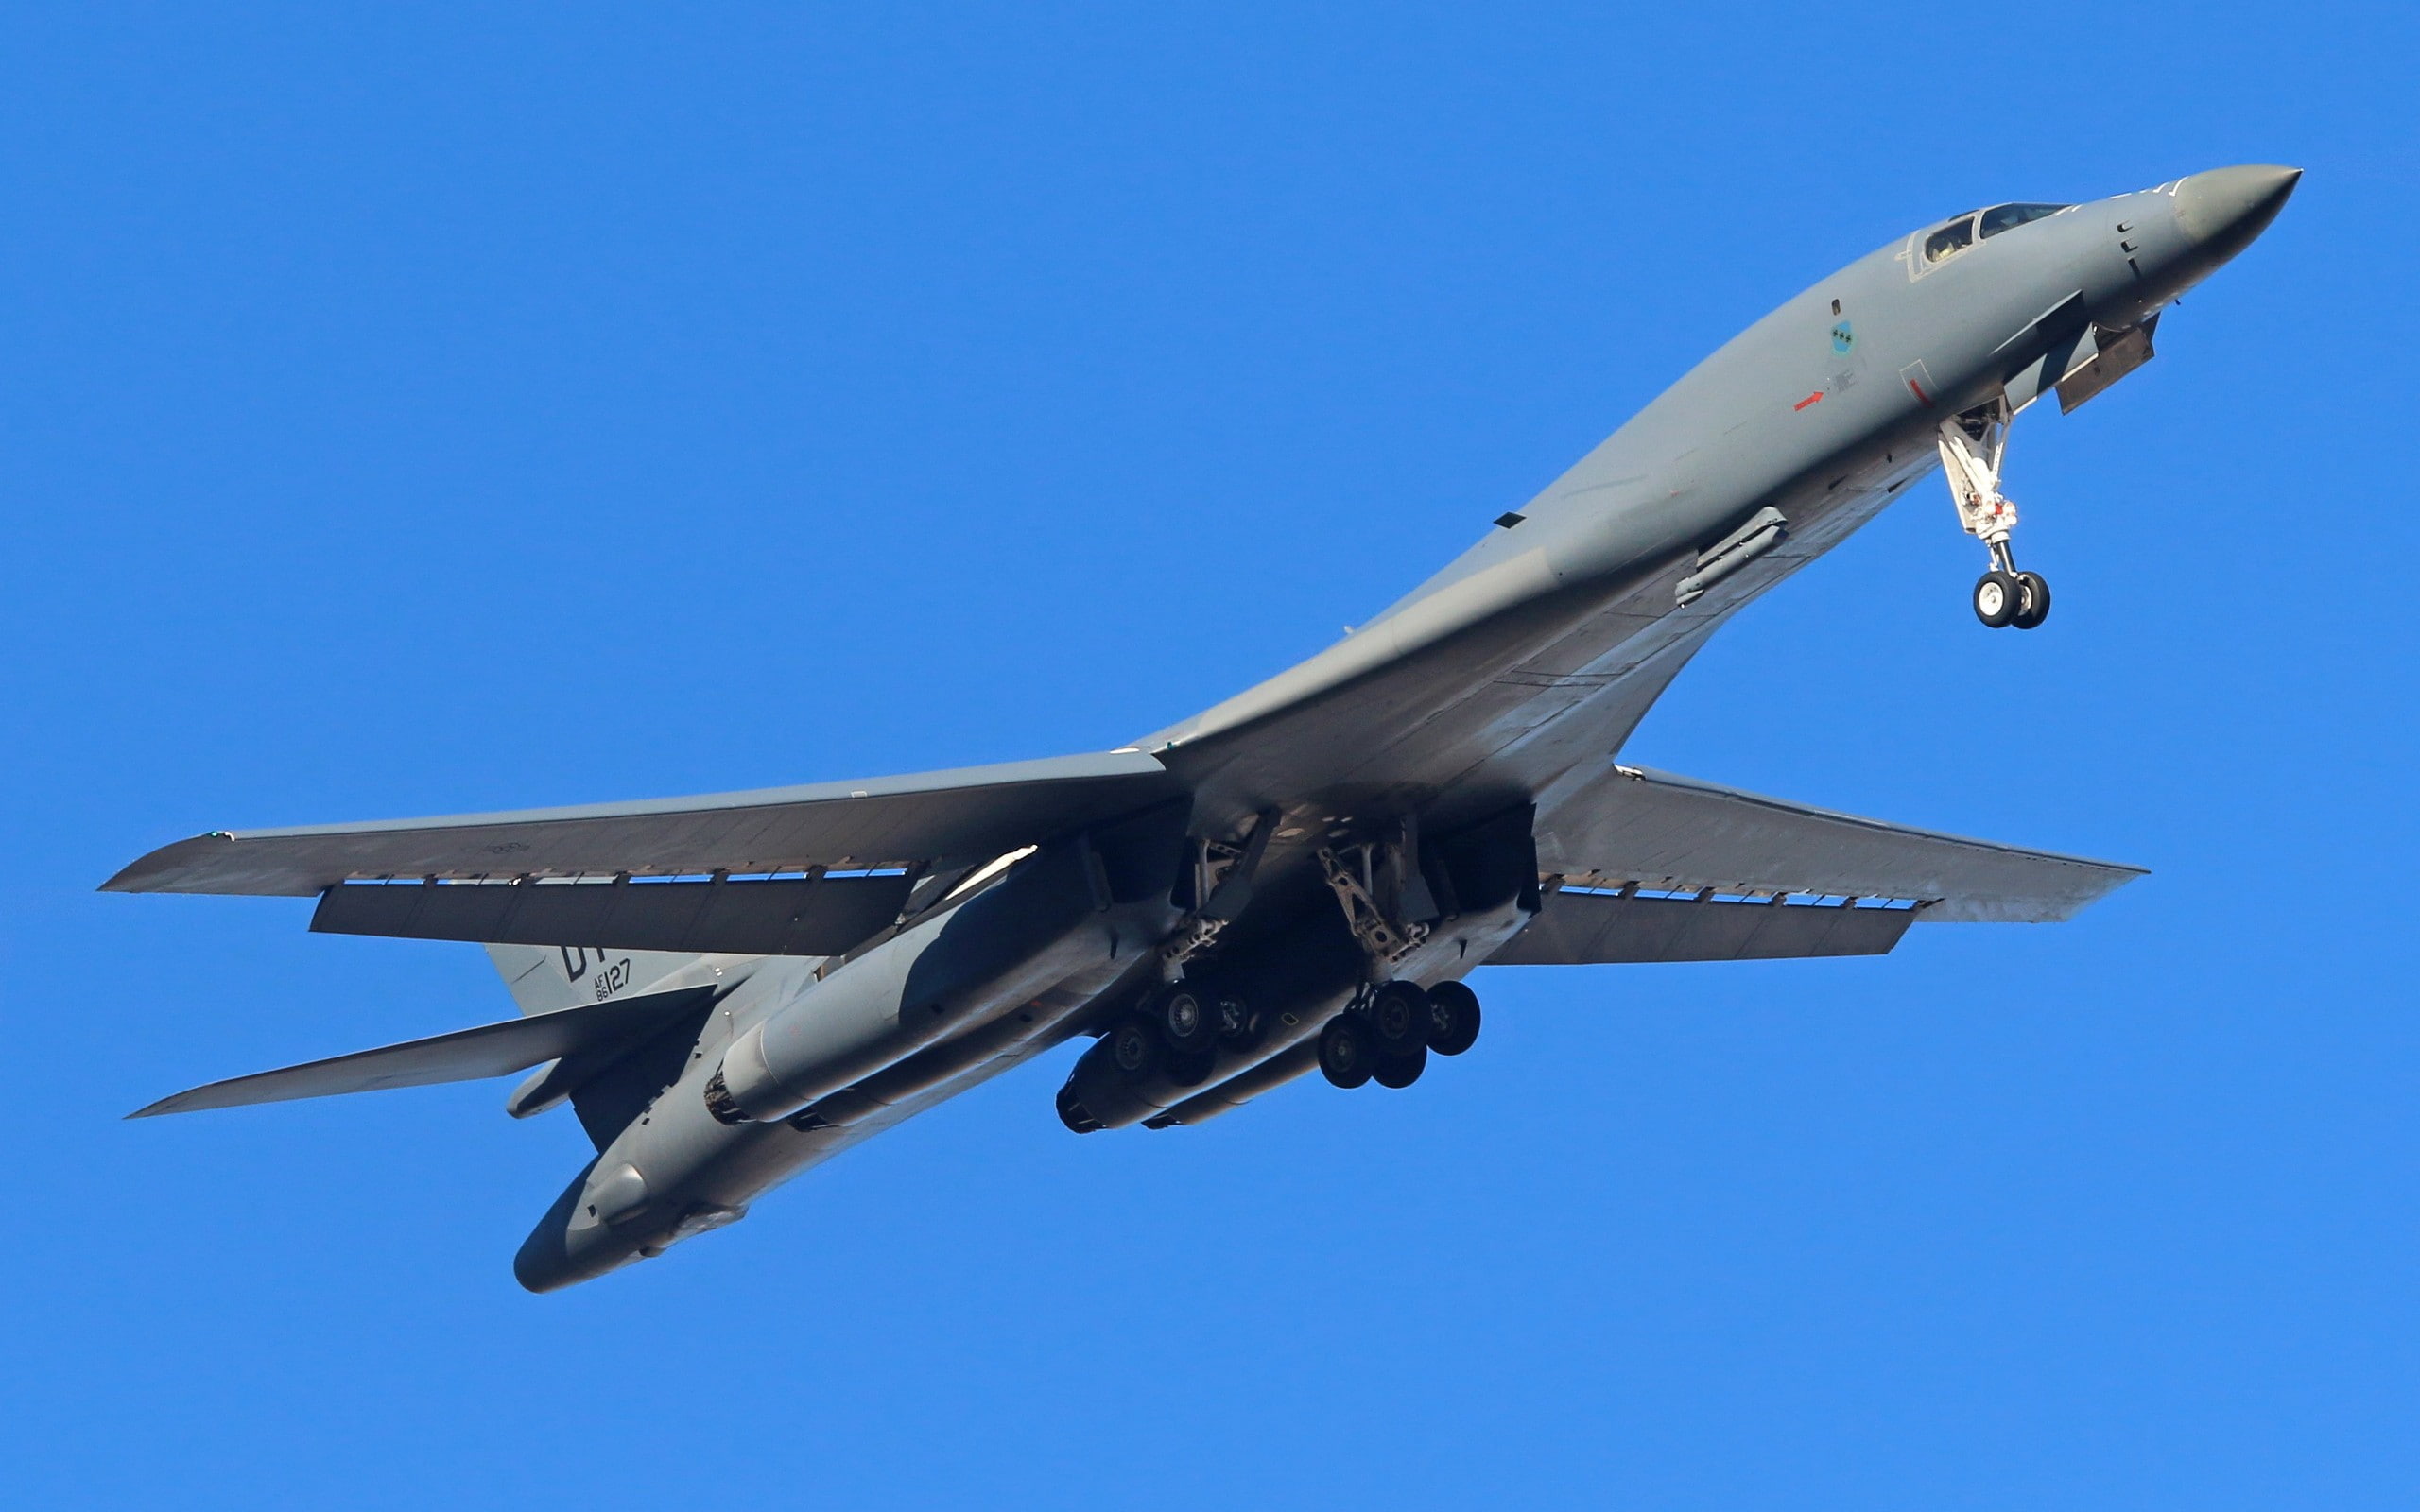 US Air Force, Supersonic, Rockwell B-1 Lancer, Heavy bomber